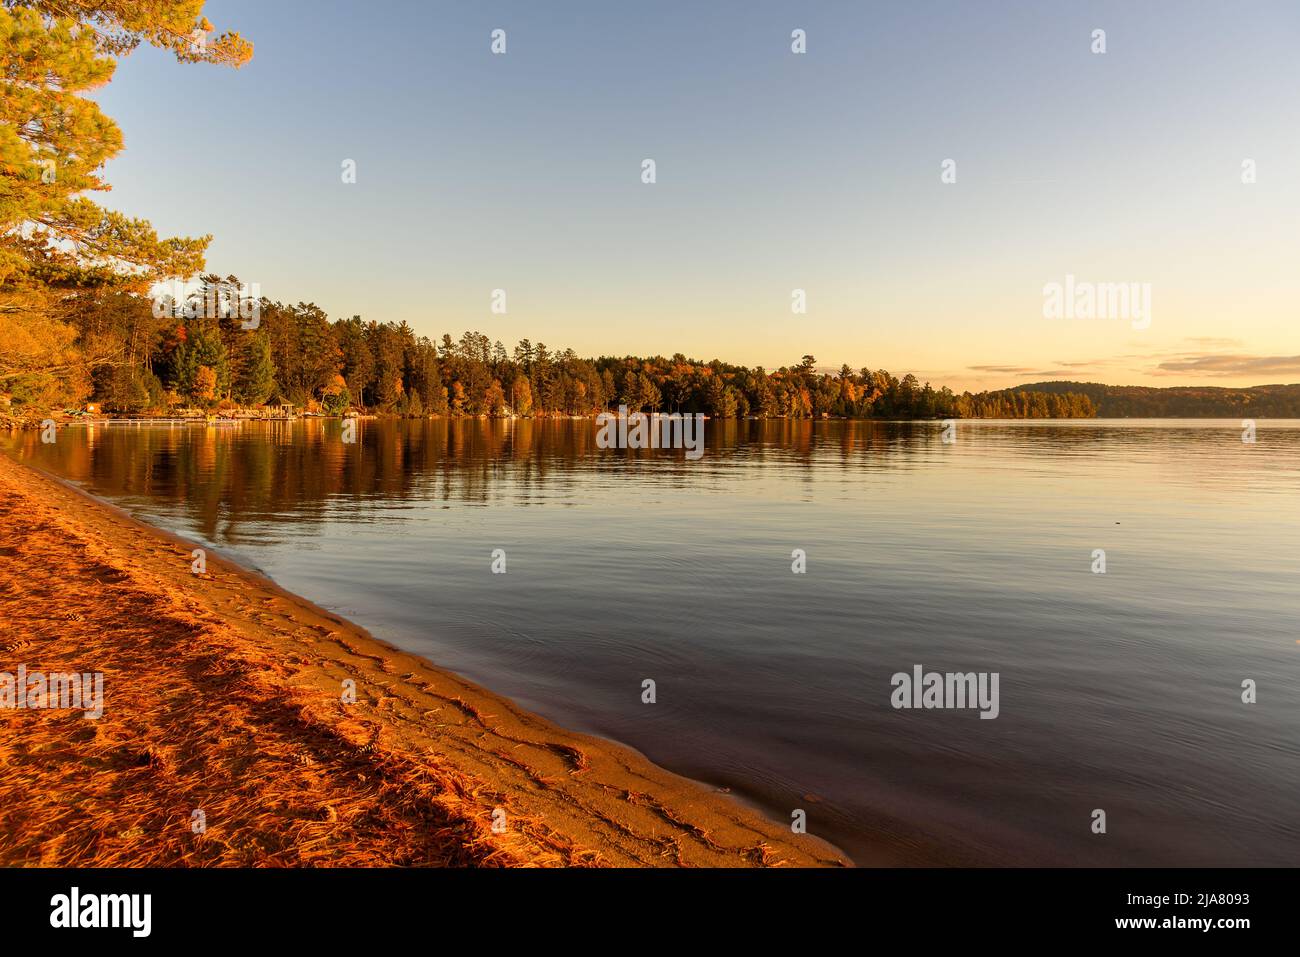 Forested shores of a lake in warm sunset light in autumn. Idyllic scenery. Stock Photo